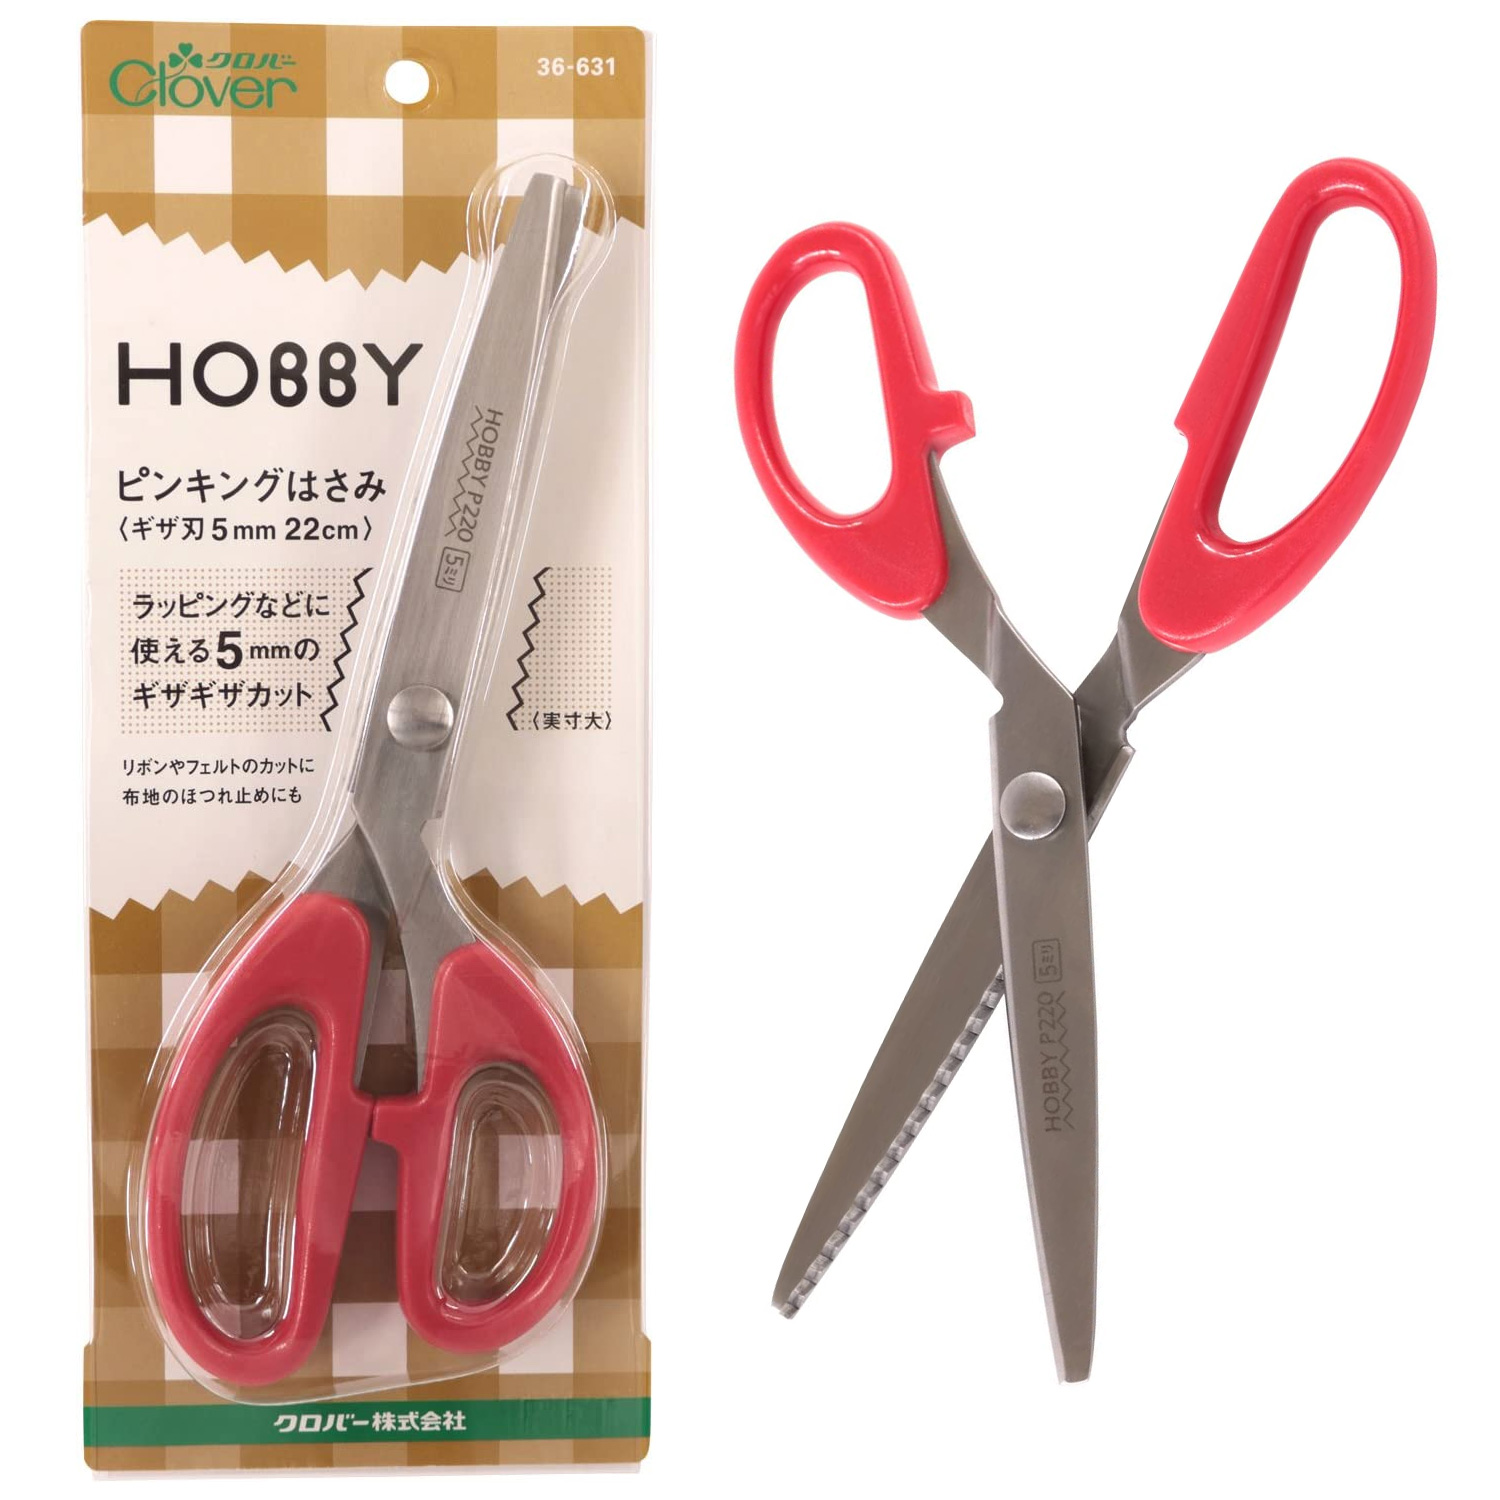 CL36-631 Hobby Pinking Scissors P210 jagged blade 5mm